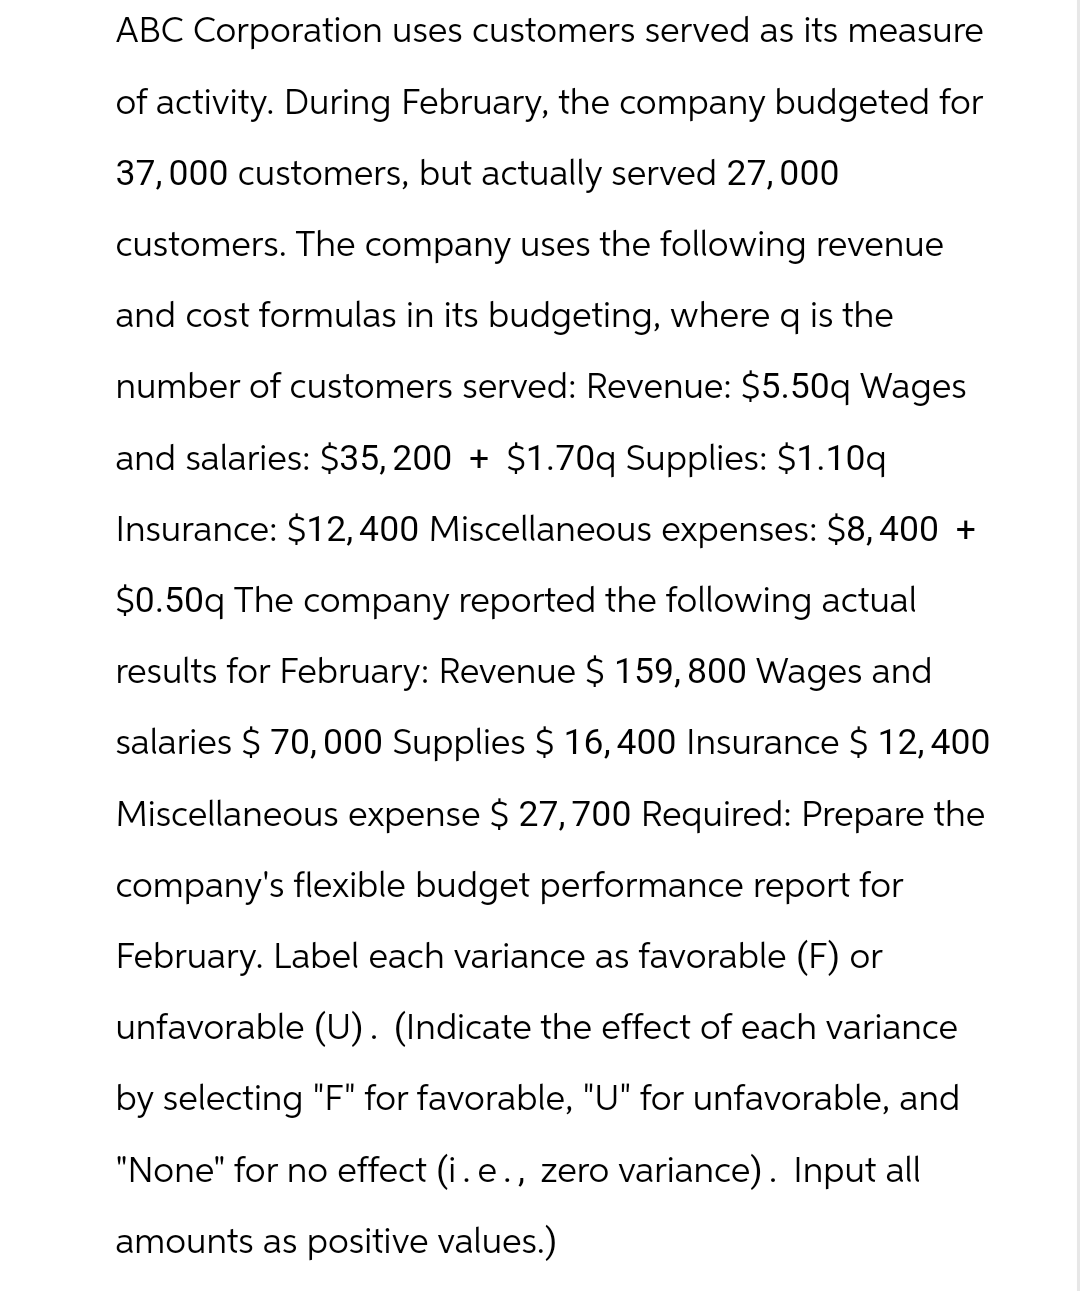 ABC Corporation uses customers served as its measure
of activity. During February, the company budgeted for
37,000 customers, but actually served 27,000
customers. The company uses the following revenue
and cost formulas in its budgeting, where q is the
number of customers served: Revenue: $5.50q Wages
and salaries: $35,200 + $1.70q Supplies: $1.10q
Insurance: $12,400 Miscellaneous expenses: $8,400 +
$0.50q The company reported the following actual
results for February: Revenue $ 159,800 Wages and
salaries $ 70,000 Supplies $ 16,400 Insurance $ 12,400
Miscellaneous expense $ 27,700 Required: Prepare the
company's flexible budget performance report for
February. Label each variance as favorable (F) or
unfavorable (U). (Indicate the effect of each variance
by selecting "F" for favorable, "U" for unfavorable, and
"None" for no effect (i.e., zero variance). Input all
amounts as positive values.)